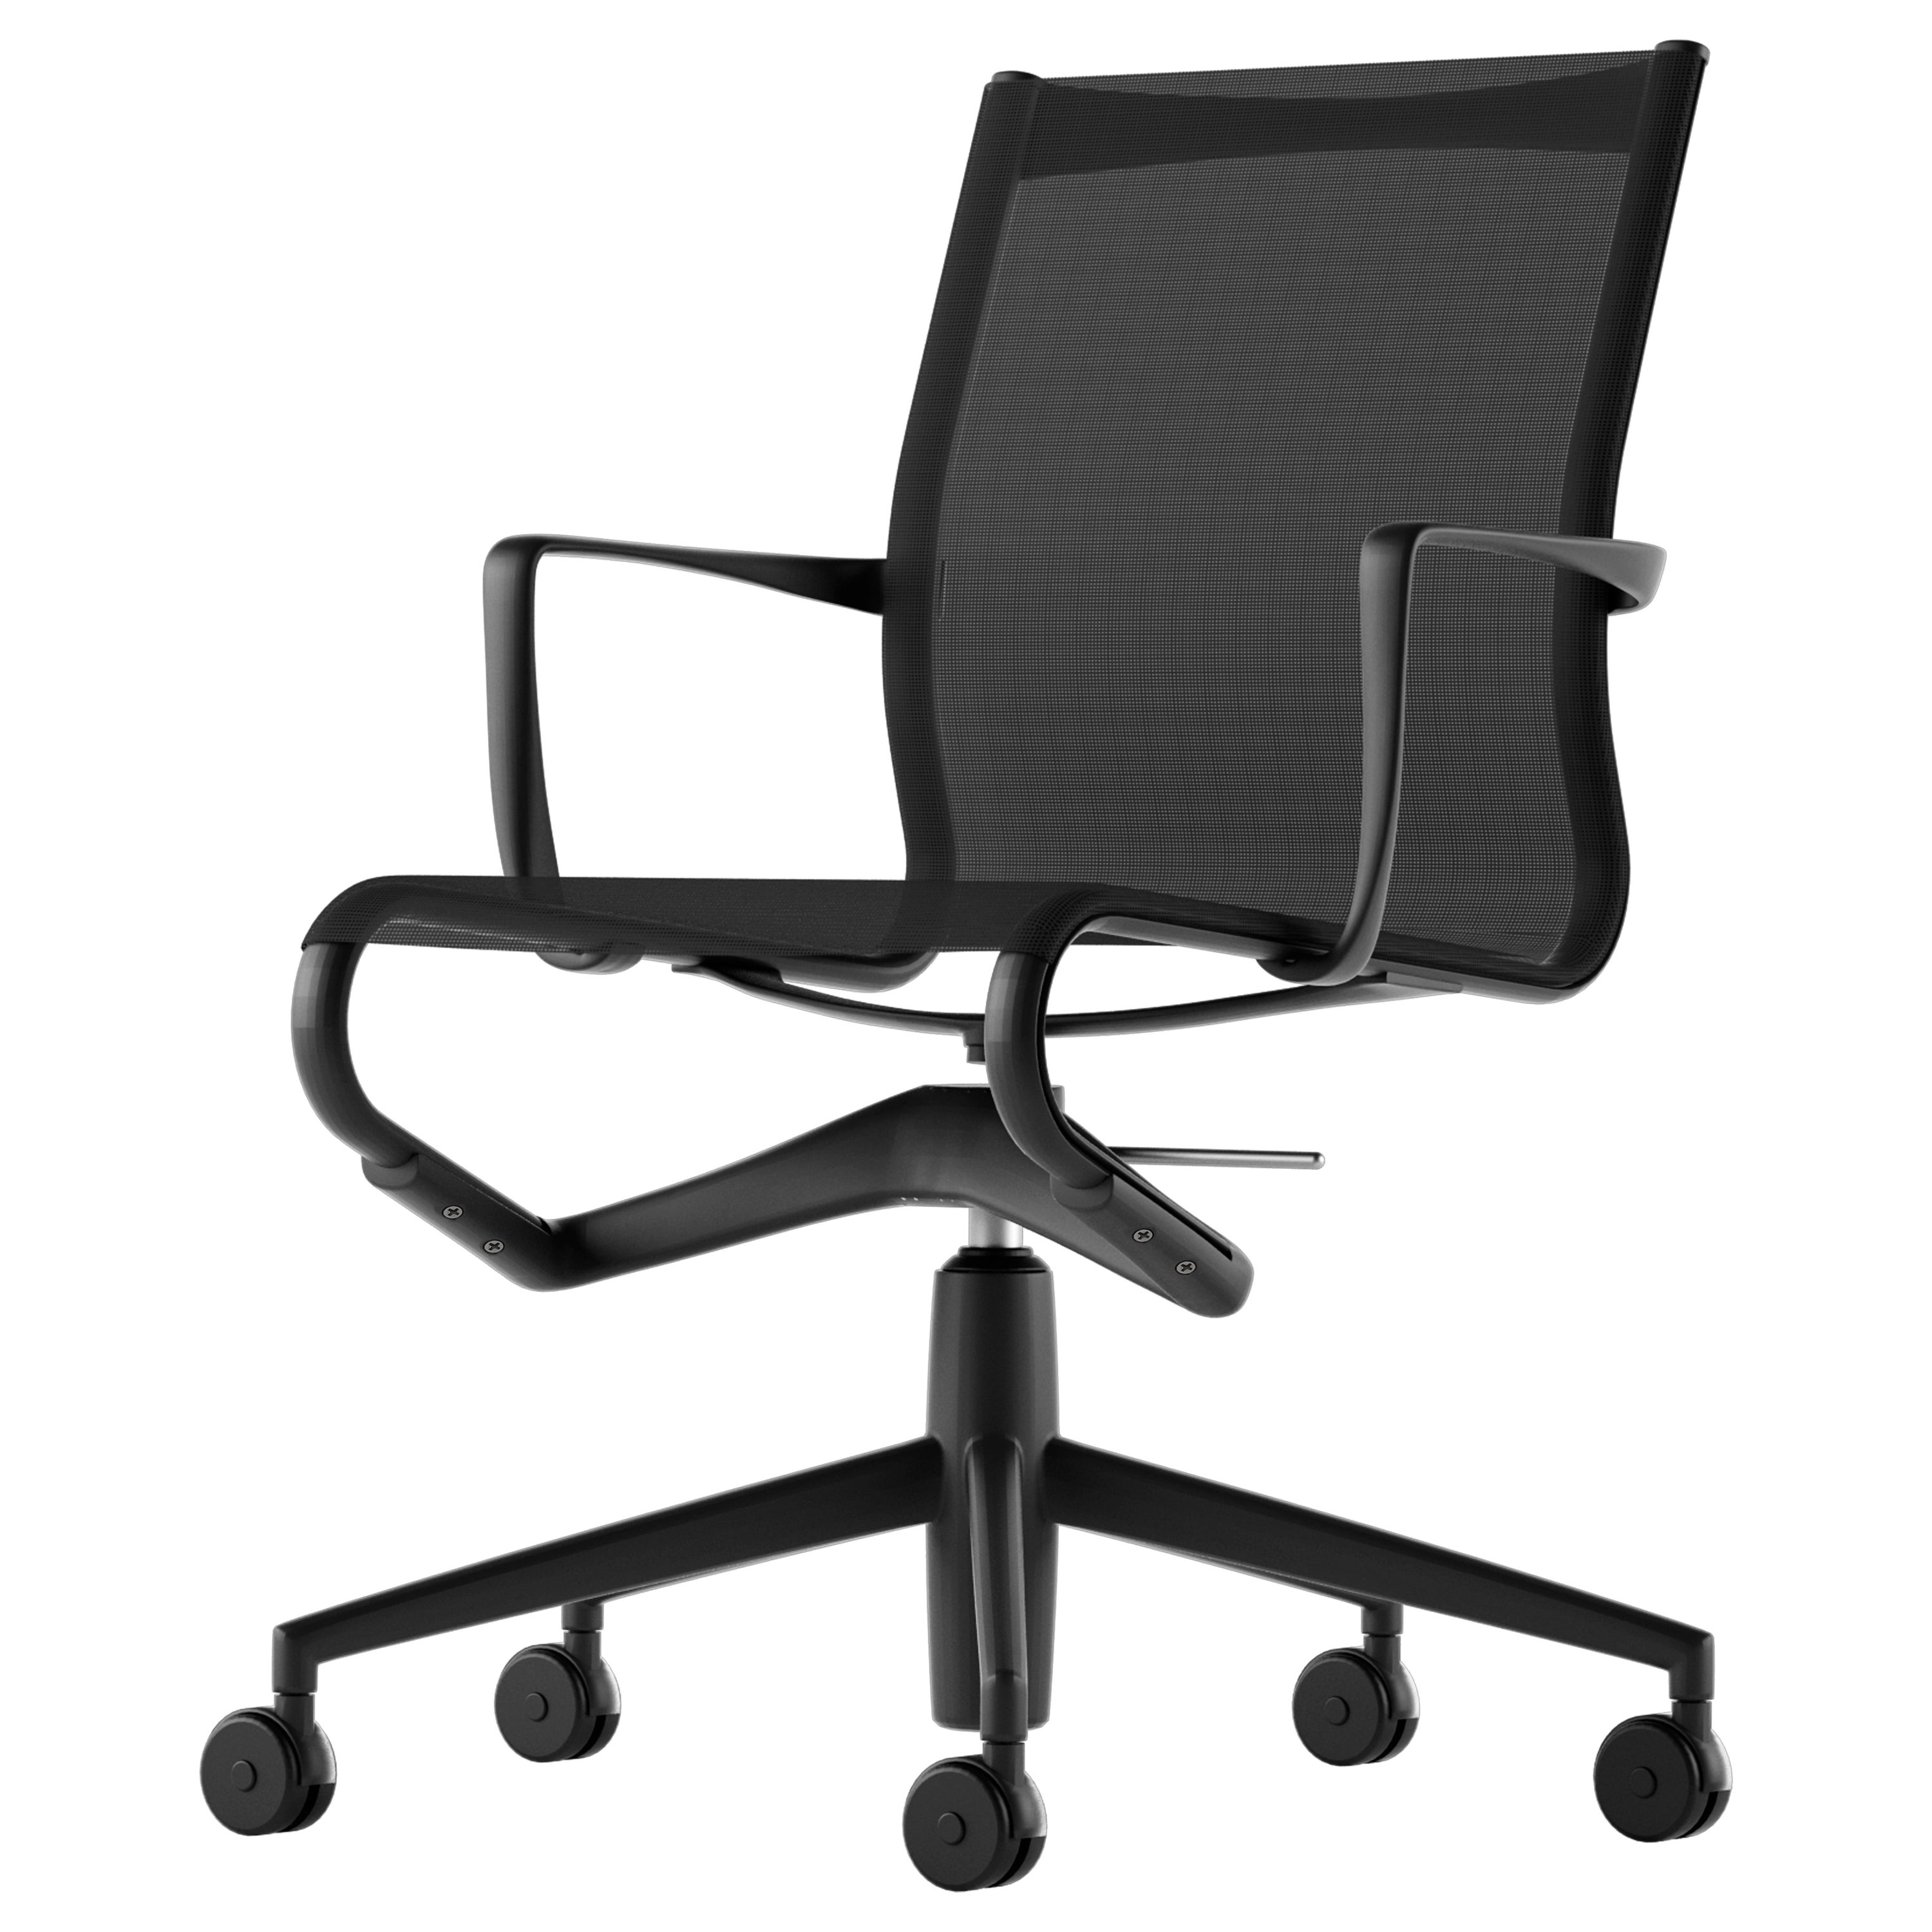 Alias 434 Rollingframe 44 Chair in Black Mesh with Lacquered Aluminum Frame For Sale